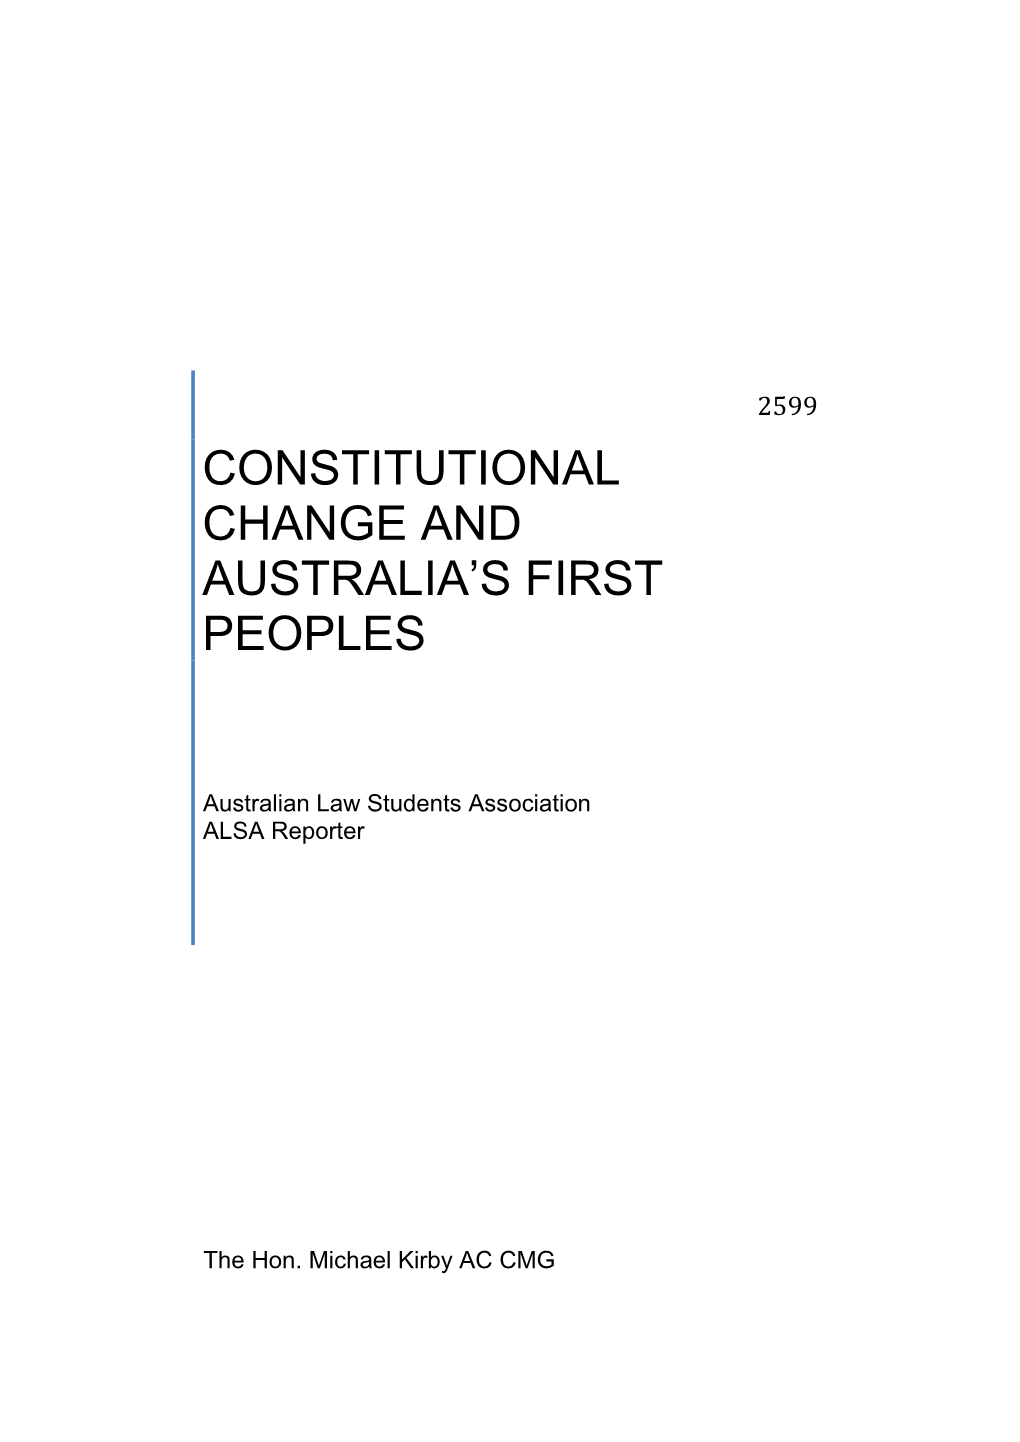 Constitutional Change and Australia's First Peoples